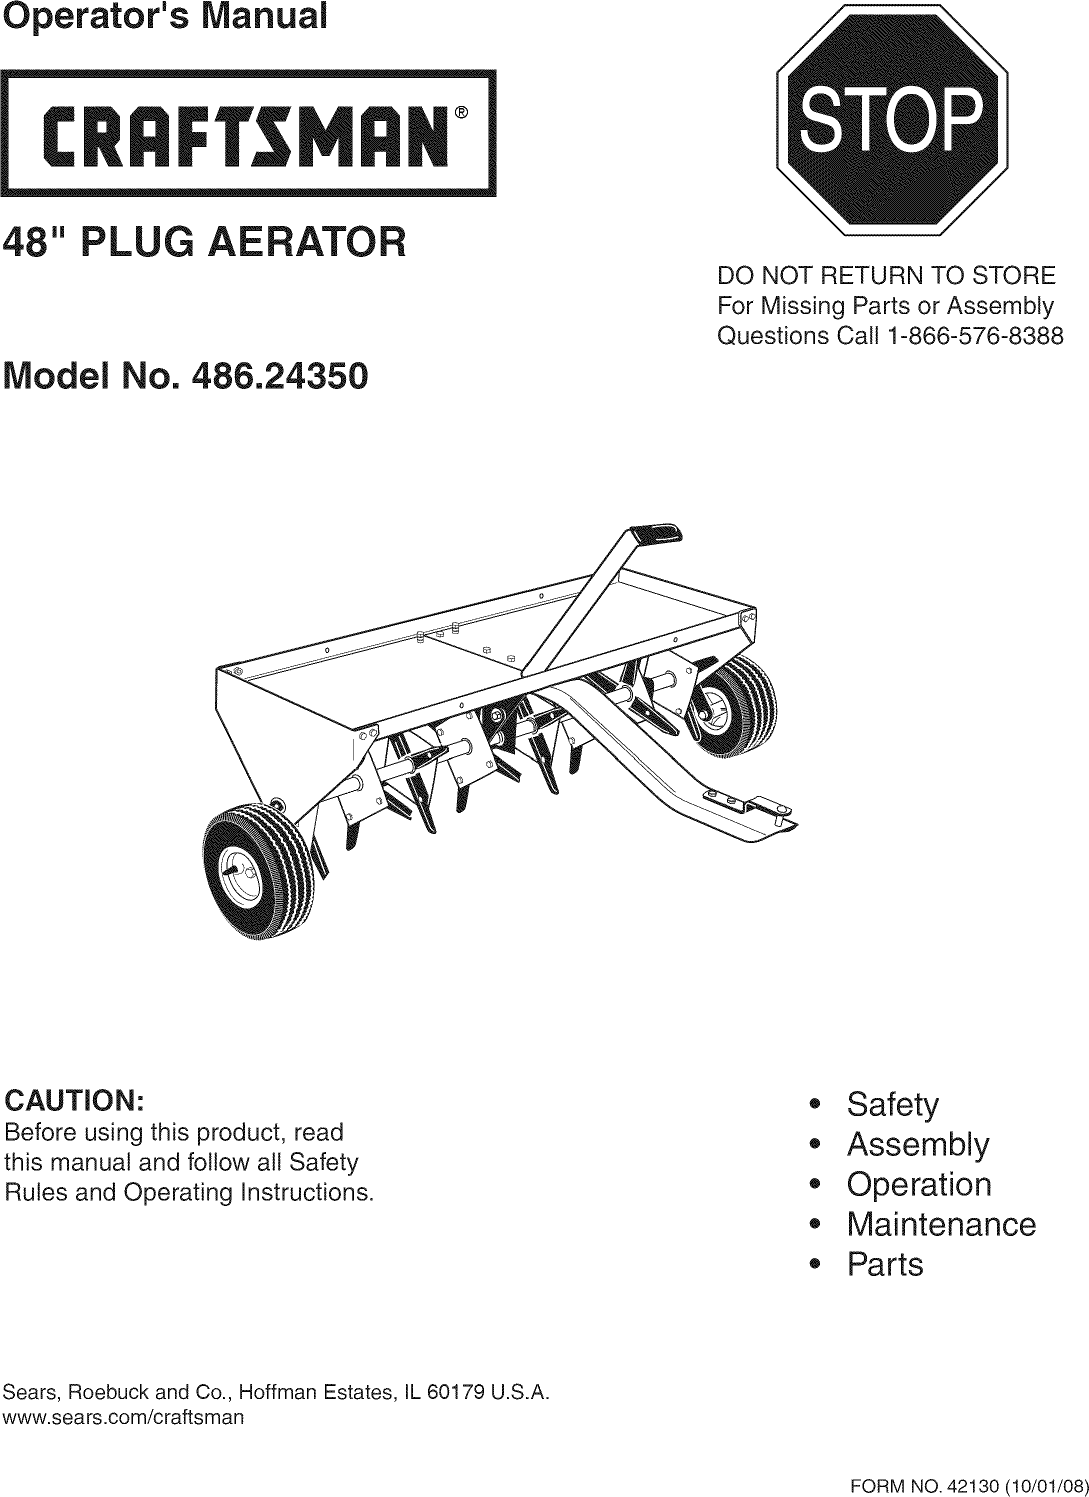 Page 1 of 12 - Craftsman 48624350 User Manual  48 PLUG AERATOR - Manuals And Guides L0811596